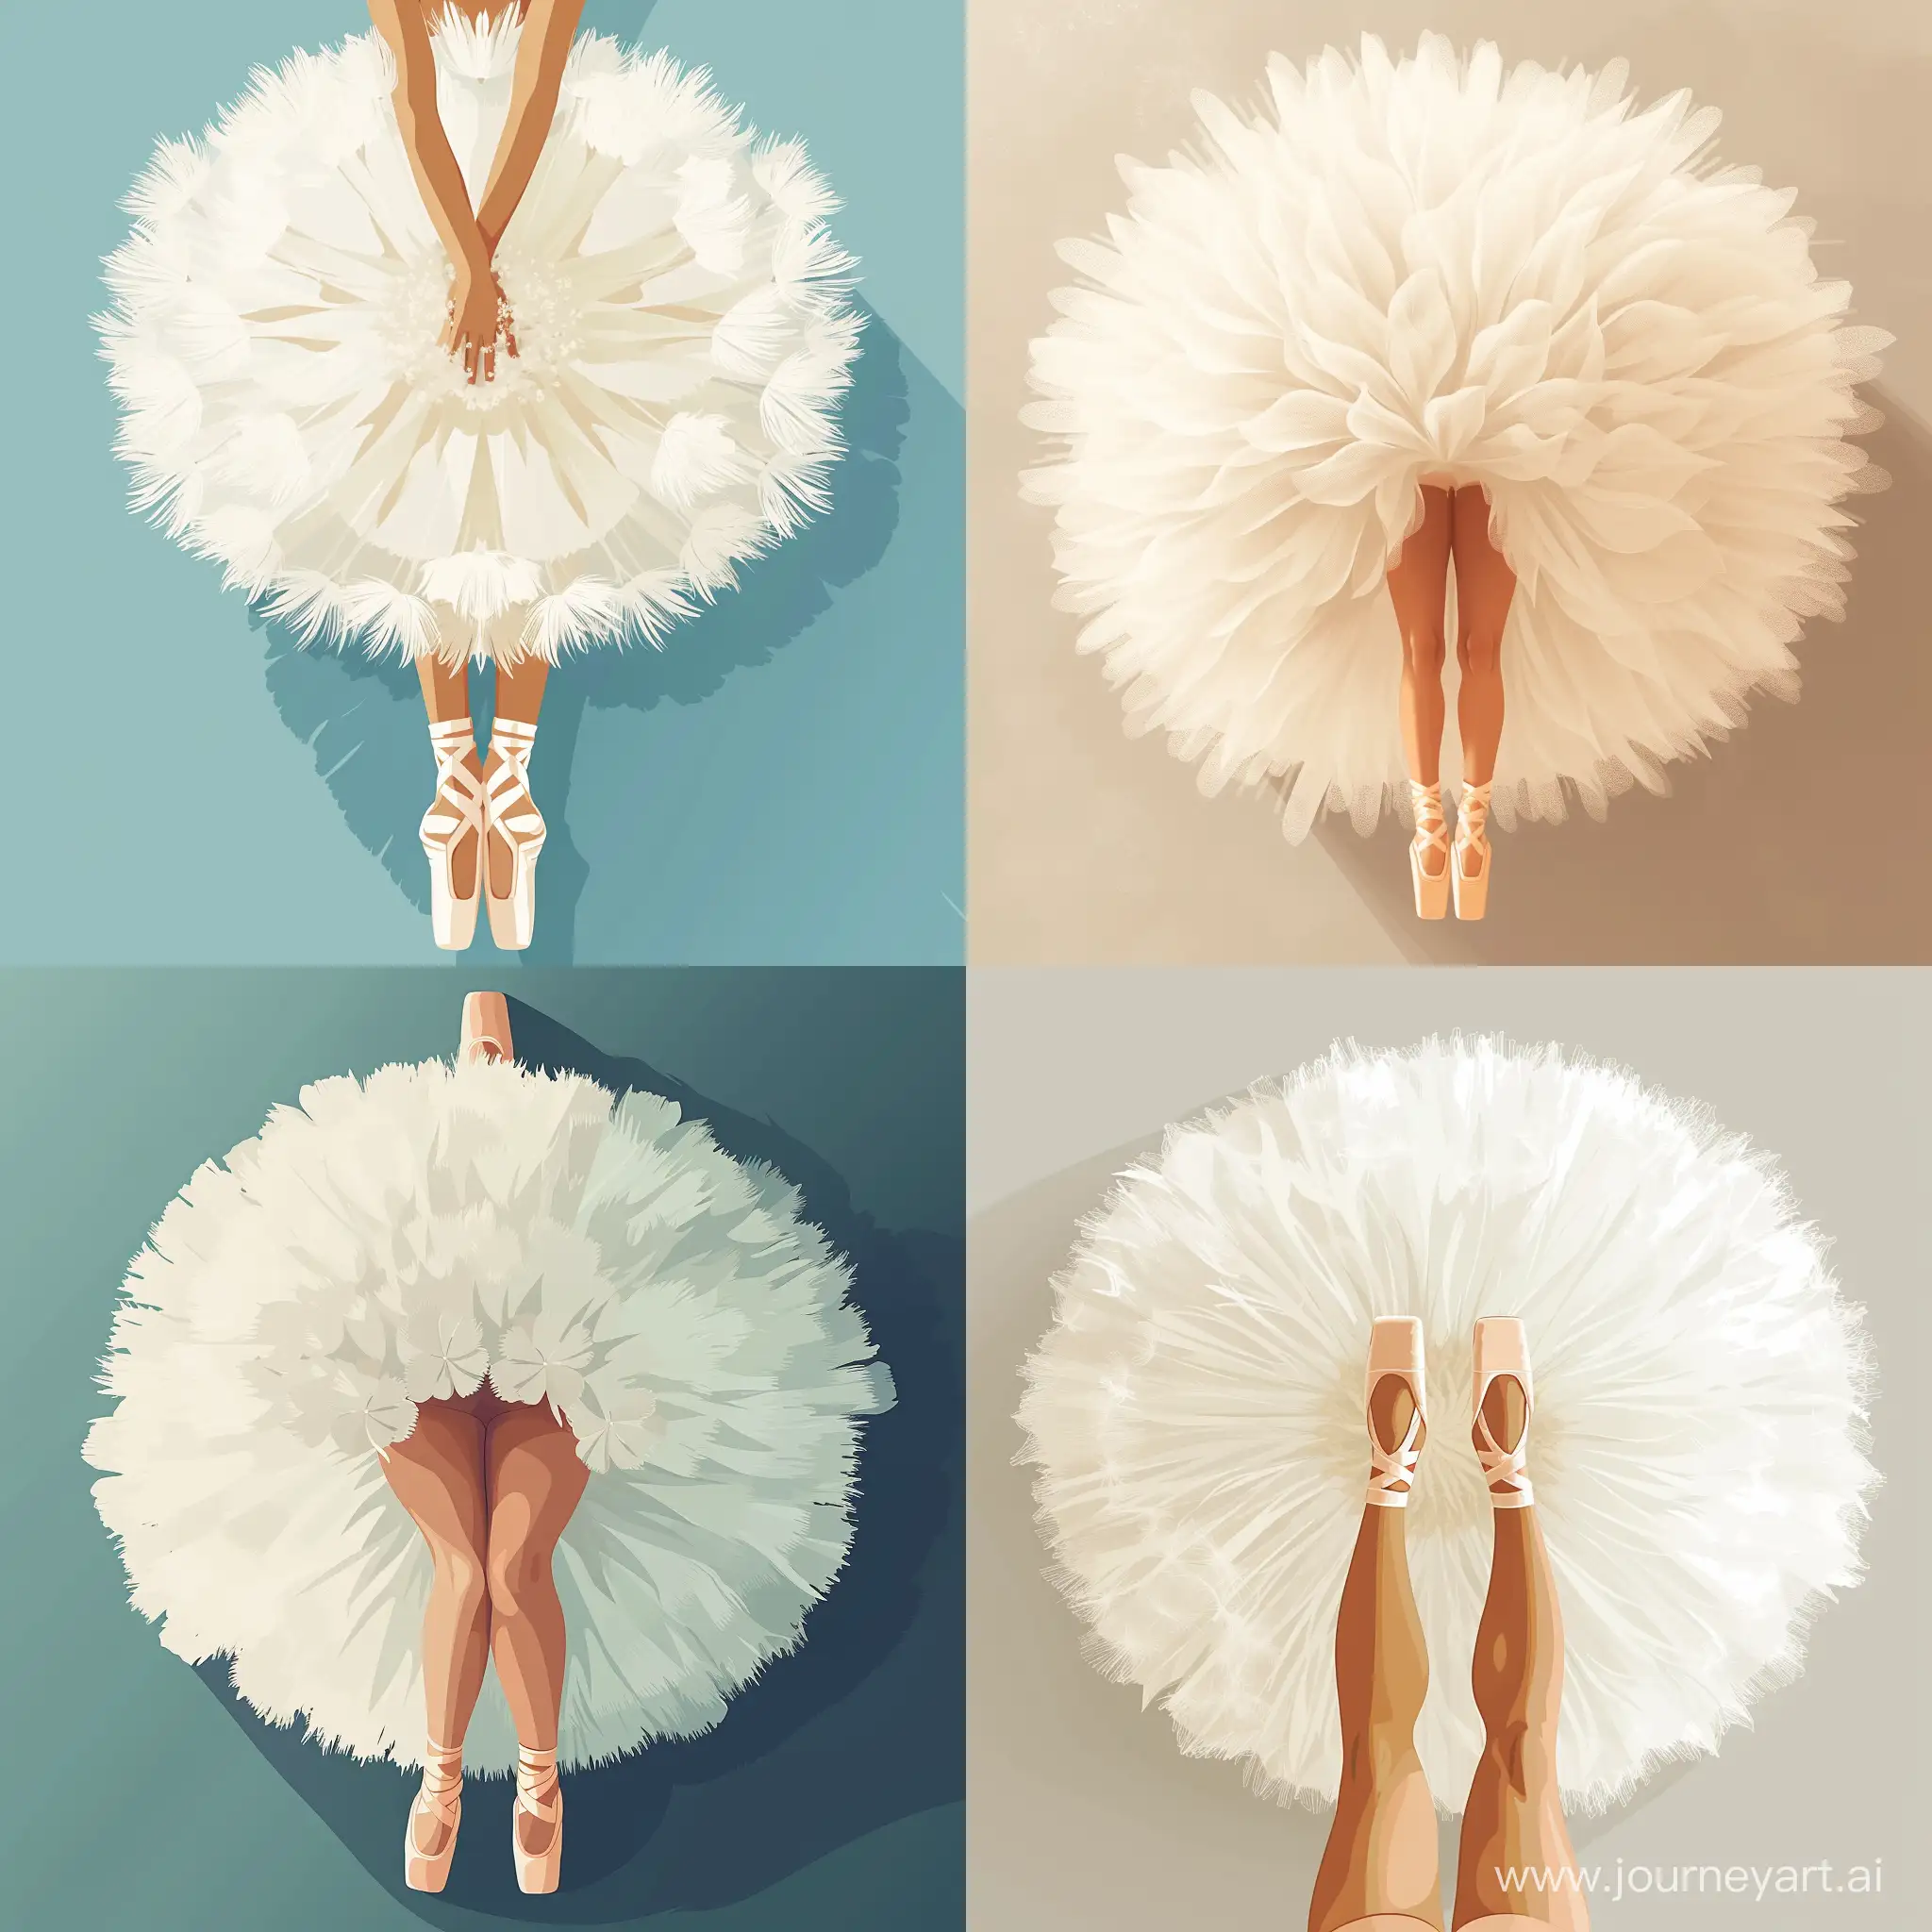 a ballet dancer from a top-down perspective. The dancer is on pointe, with her feet closely together, wearing a voluminous white tutu that fans out beautifully around her, resembling a dandelion in full bloom., in cartoon flat style